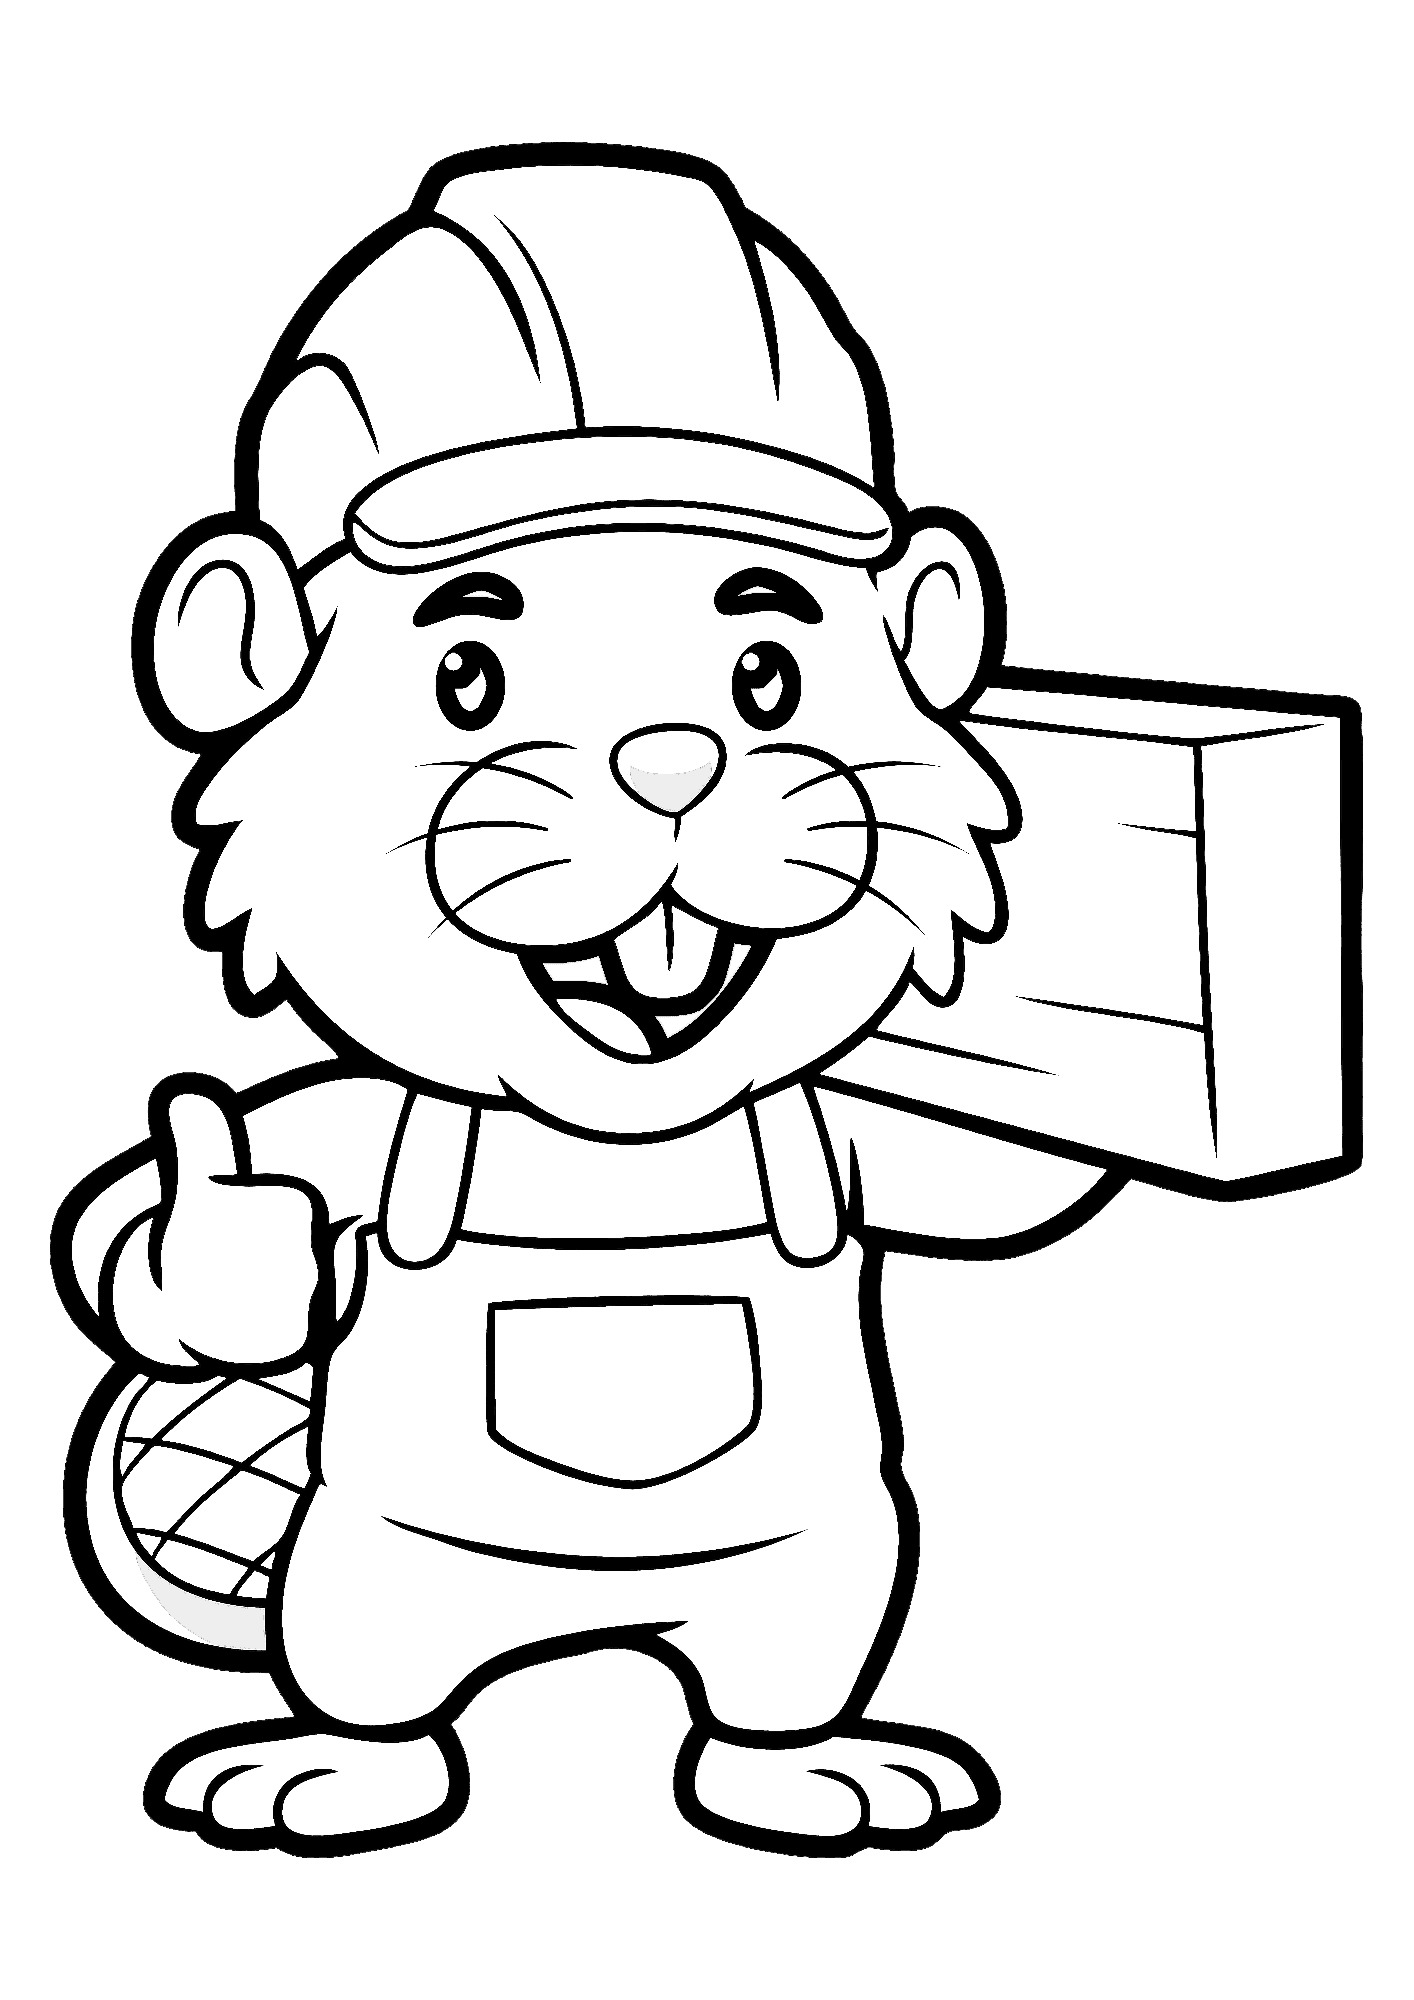 Beaver Picture Coloring Page